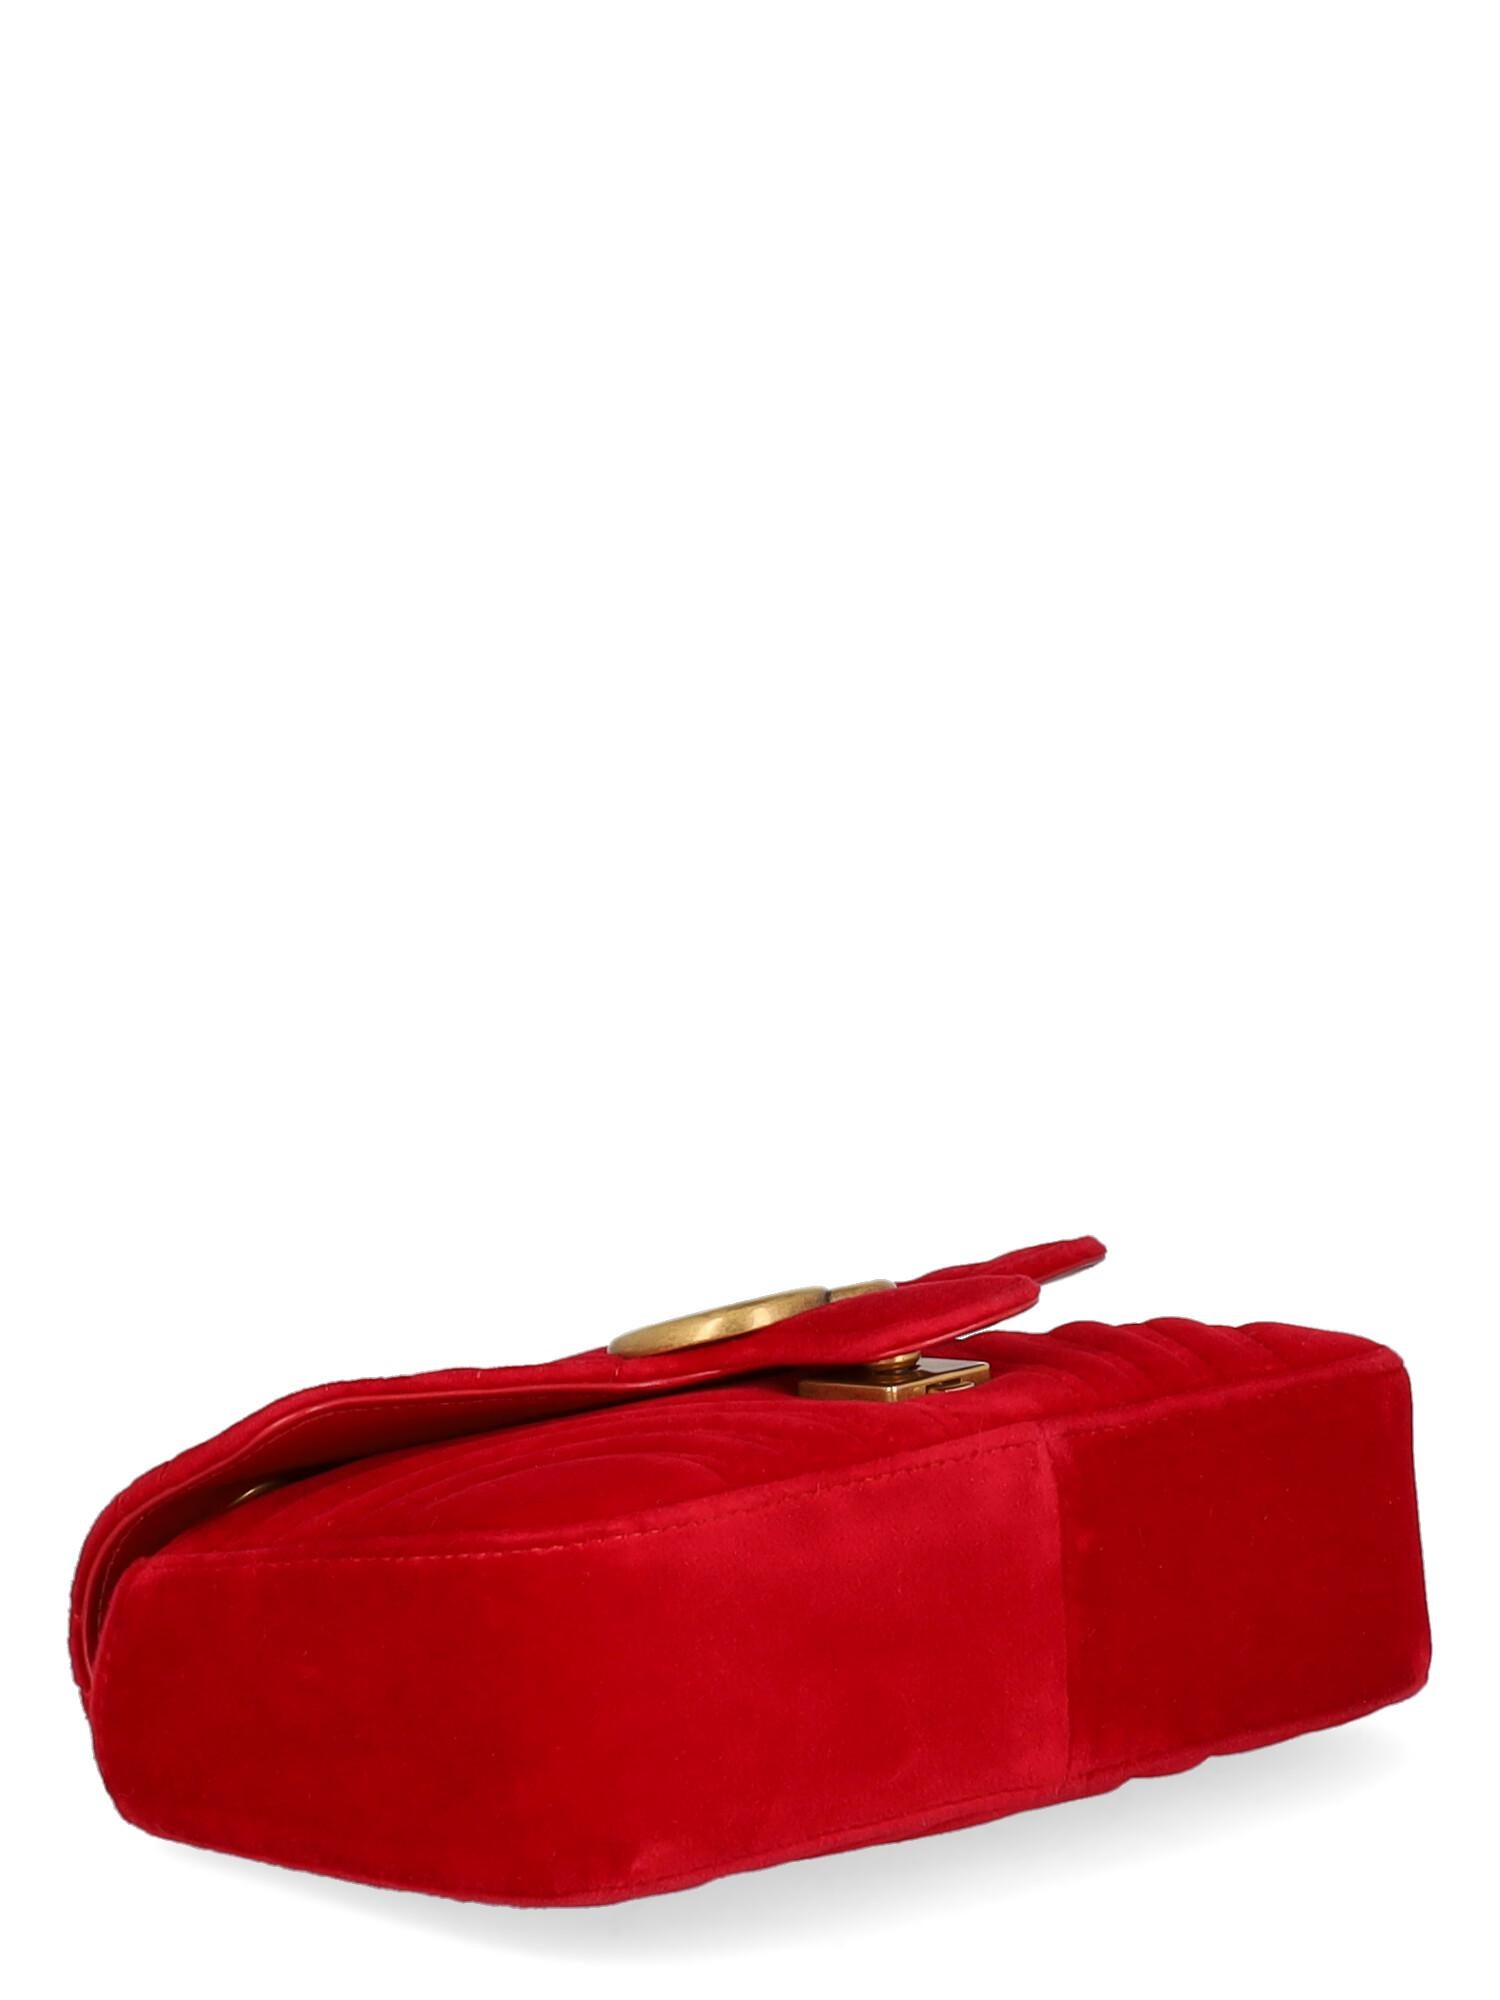 Gucci Women Shoulder bags Marmont Red Fabric  For Sale 1